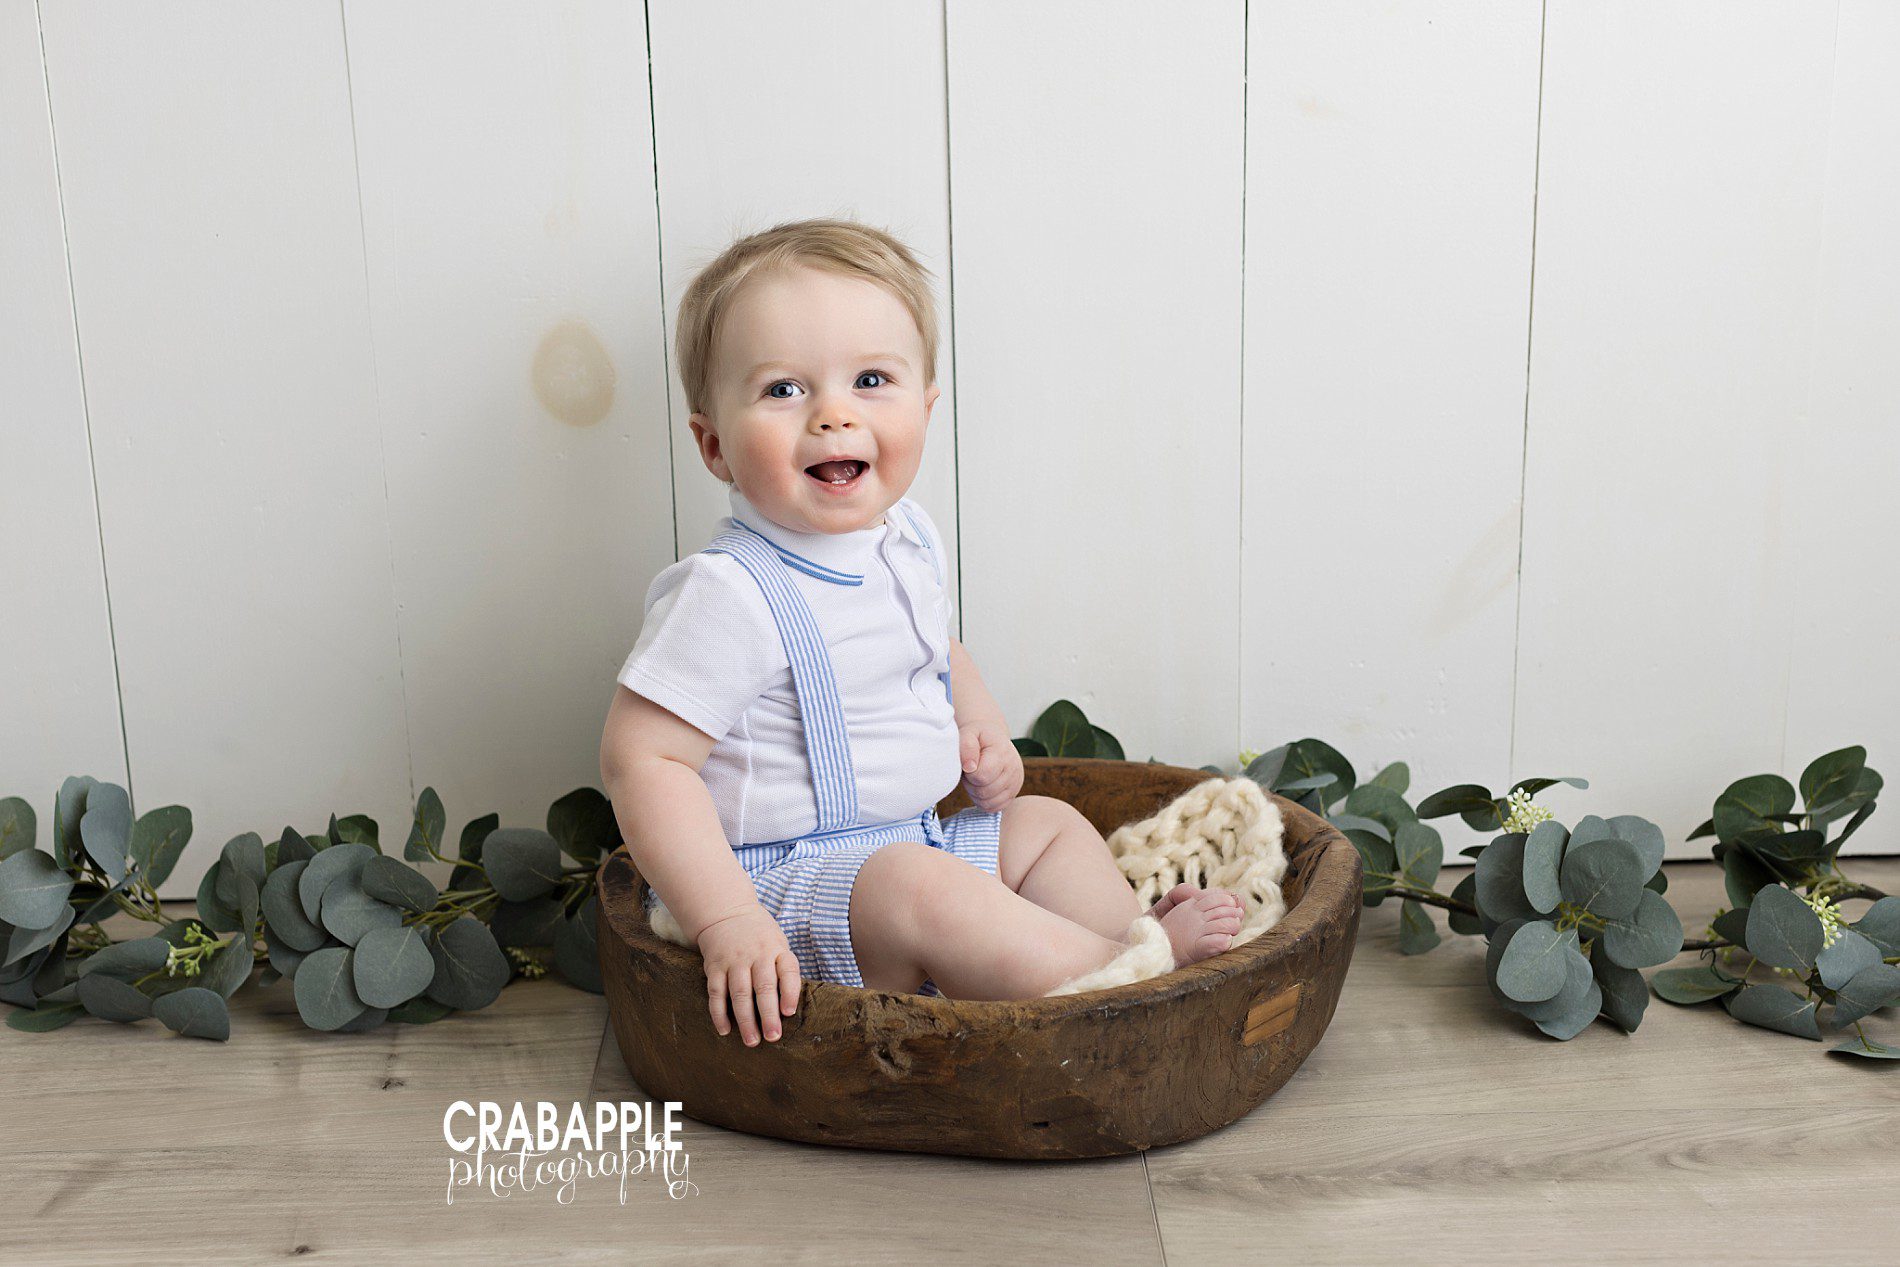 spring photo ideas for baby